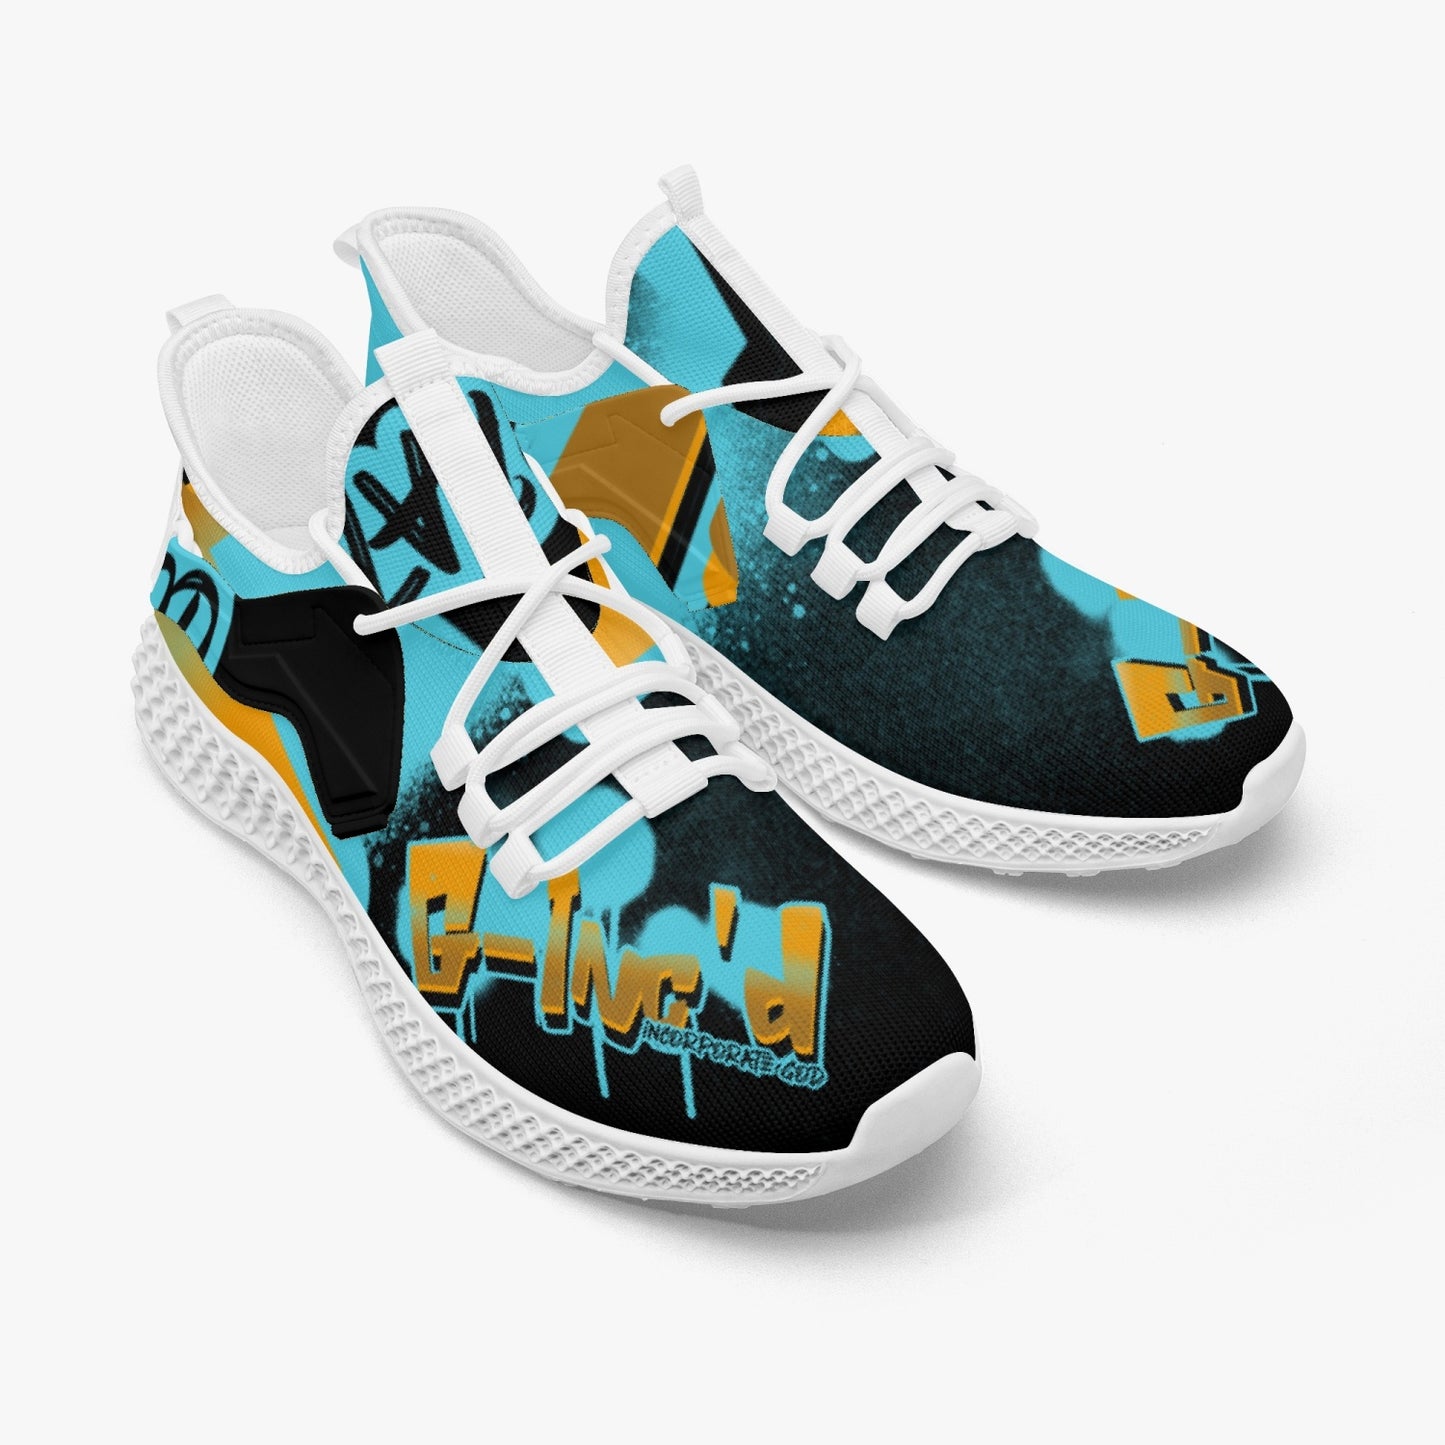 G-Inc'd Mesh Knit Turquoise Sneakers